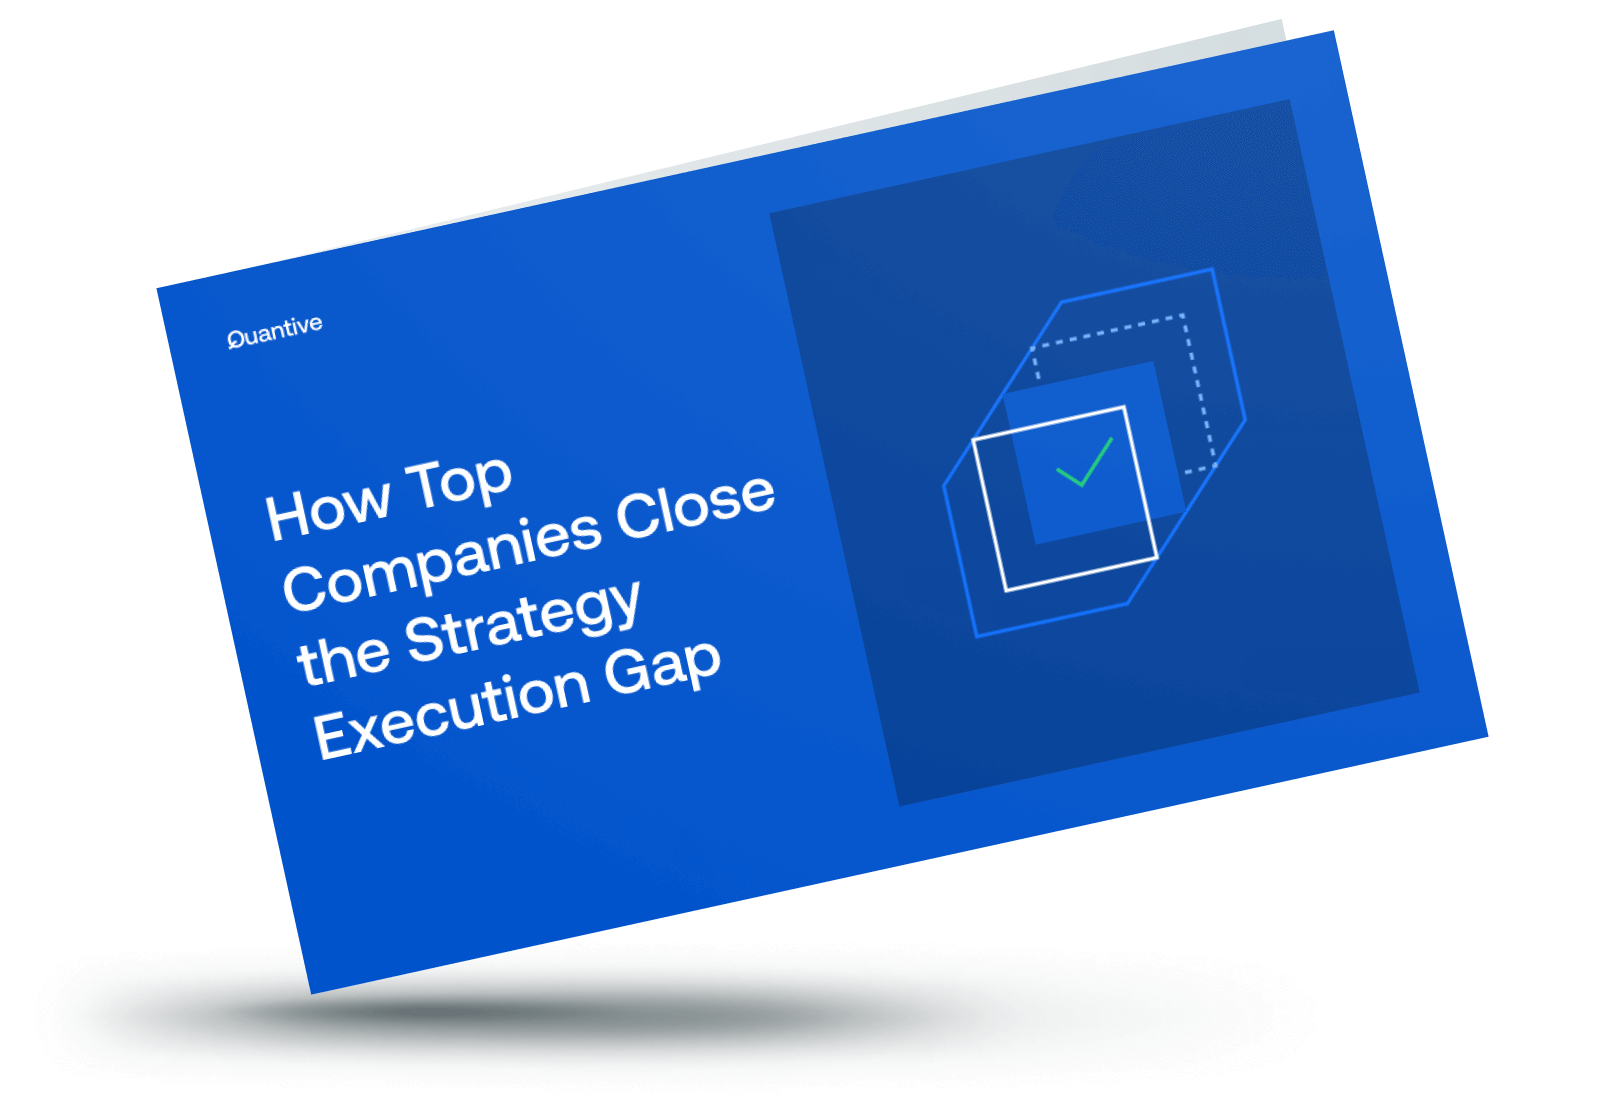 How Top Companies Close the Strategy Execution Gap